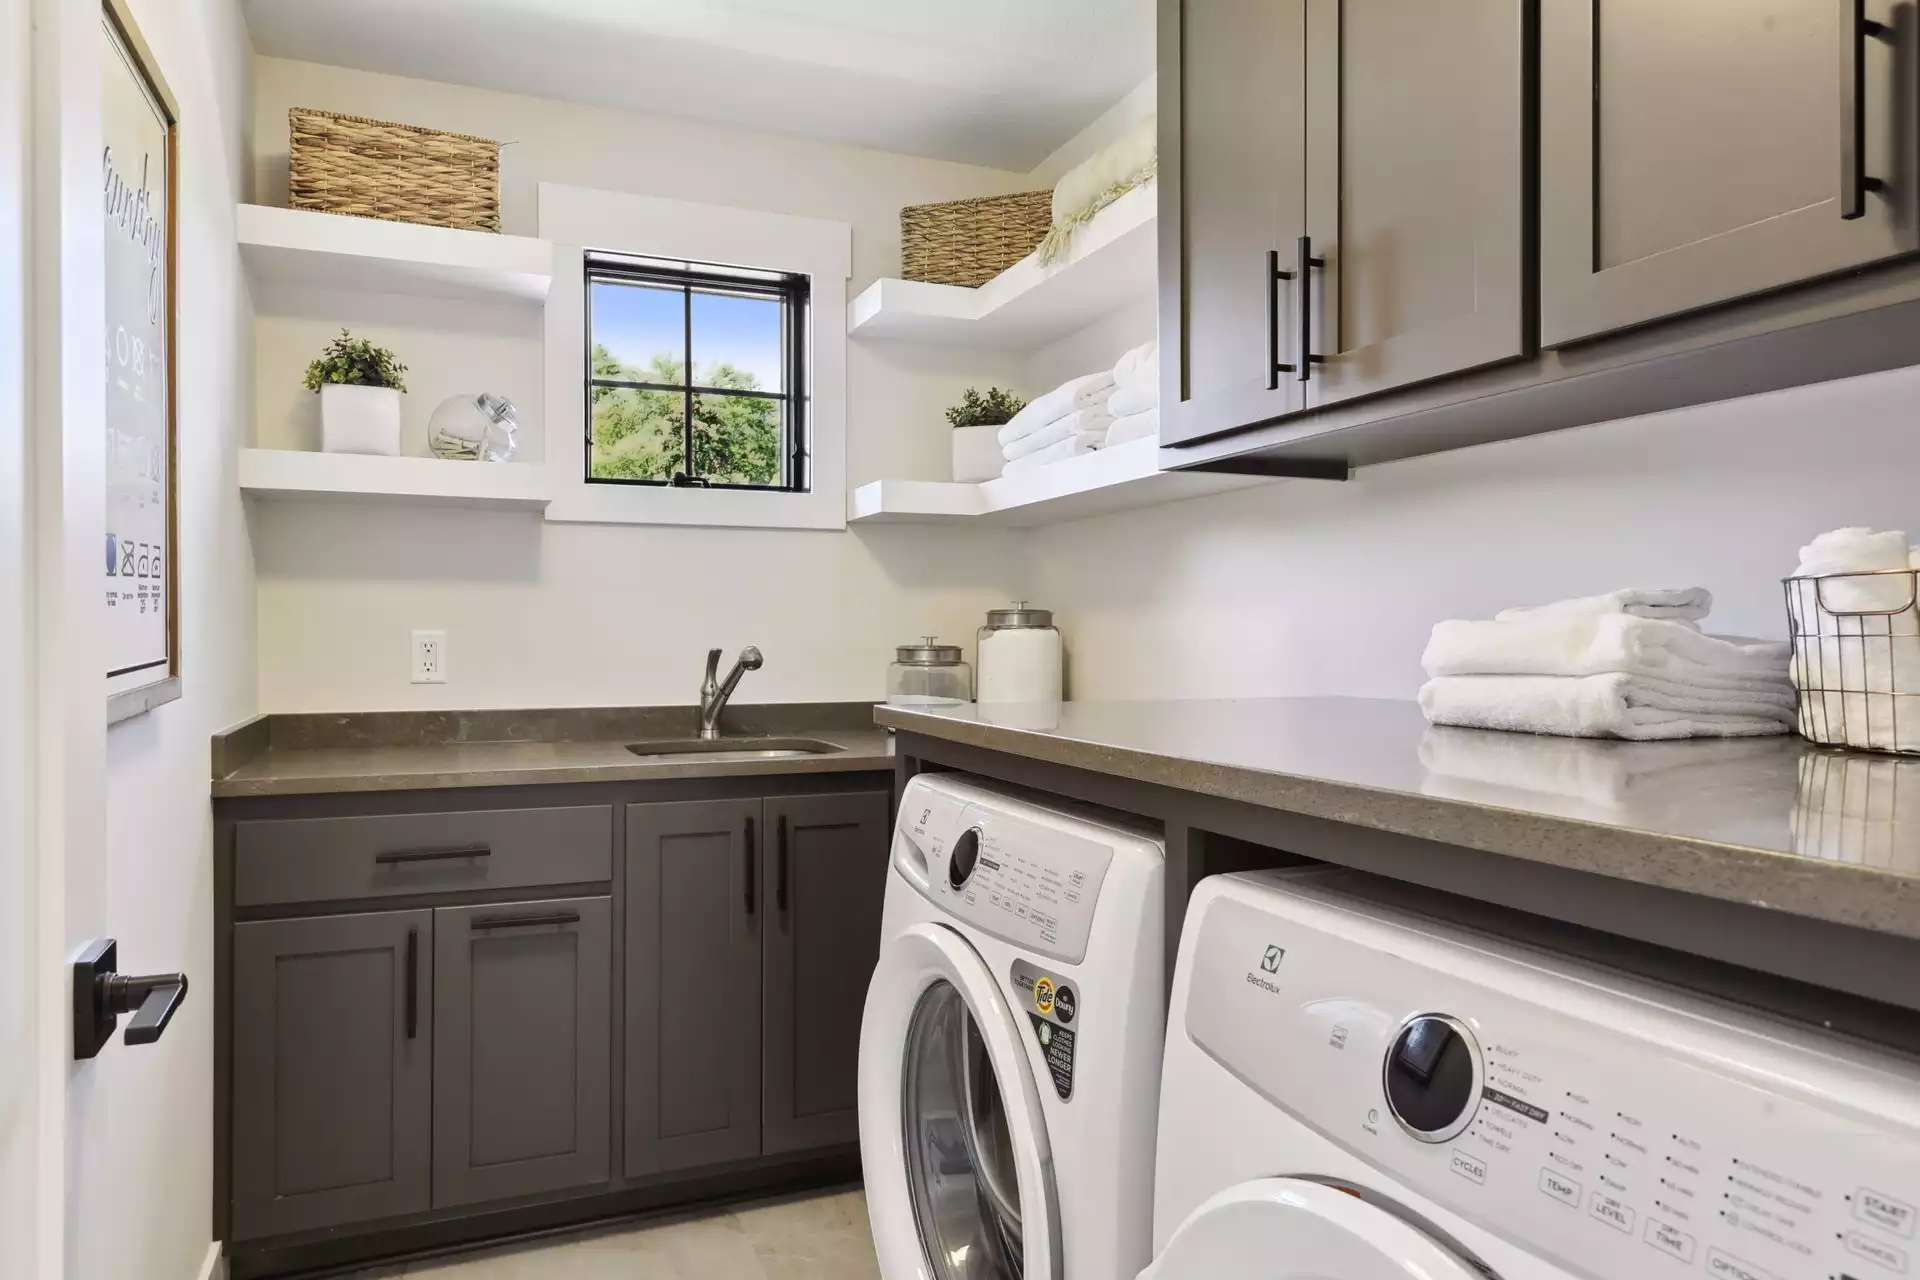 Laundry room with under counter washer & dryer